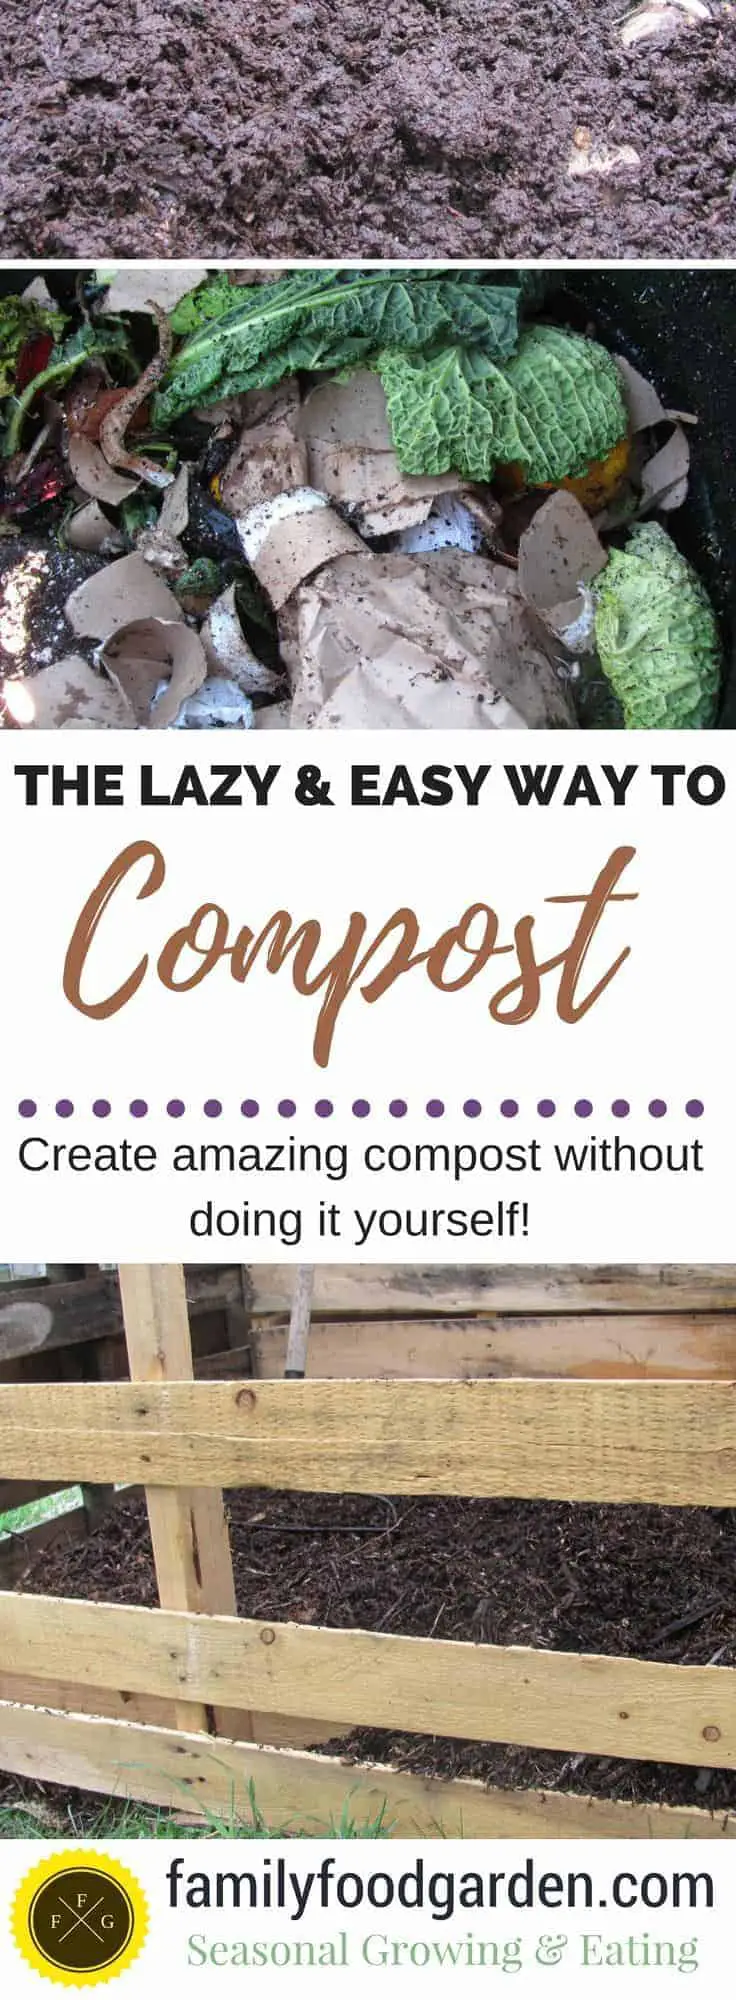 Do you suck at composting? Learn how to make amazing compost without doing it yourself!